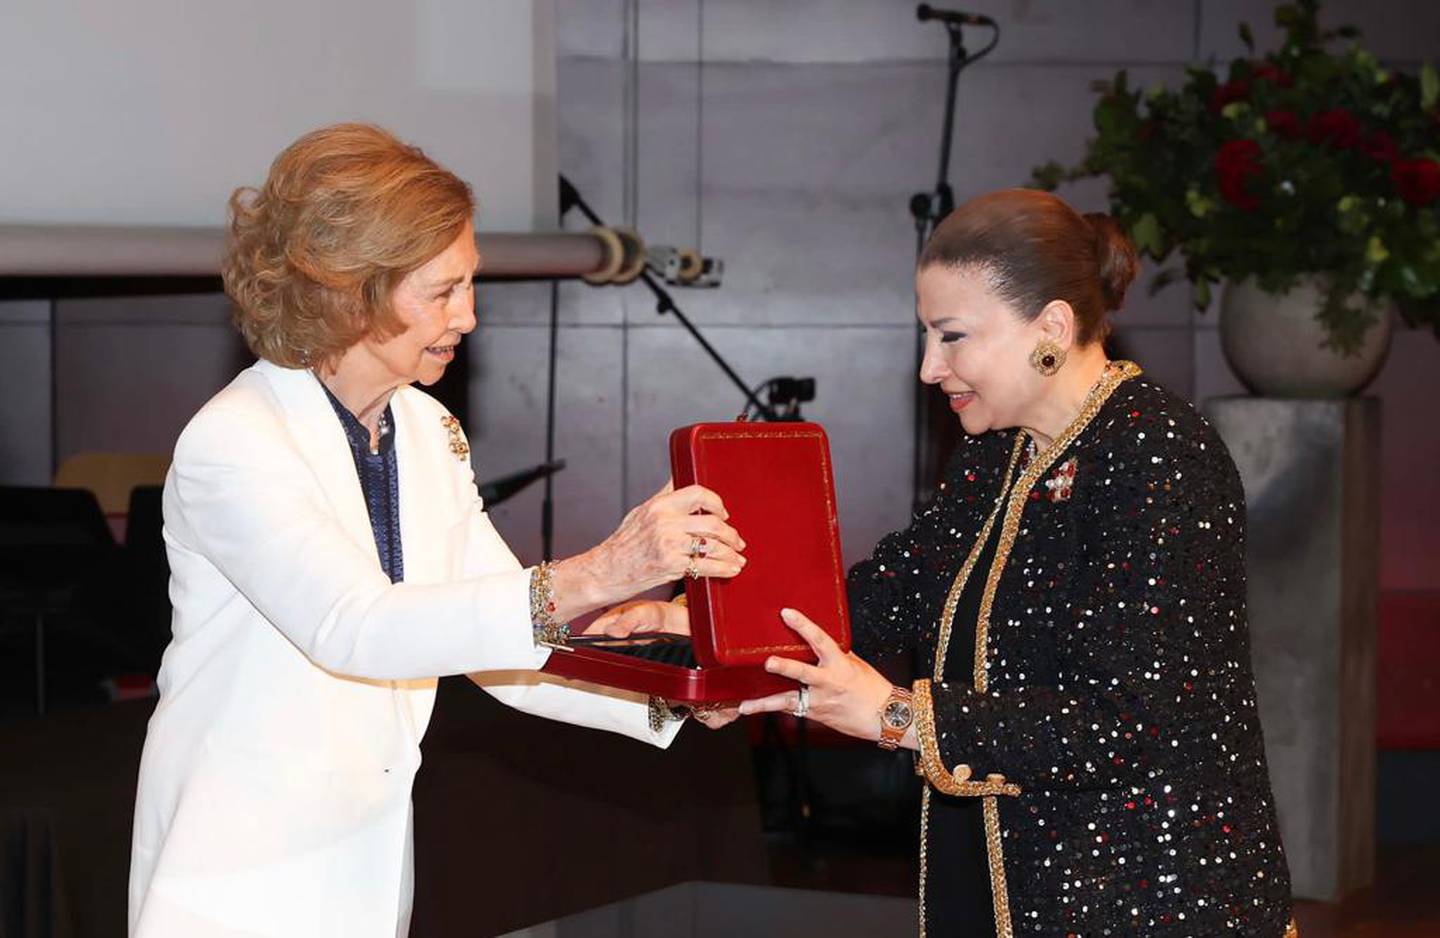 Abu Dhabi Music and Arts Foundation founder Huda Alkhamis Kanoo receives the Medal of Honour from Medal of Honour Queen Sofia of Spain